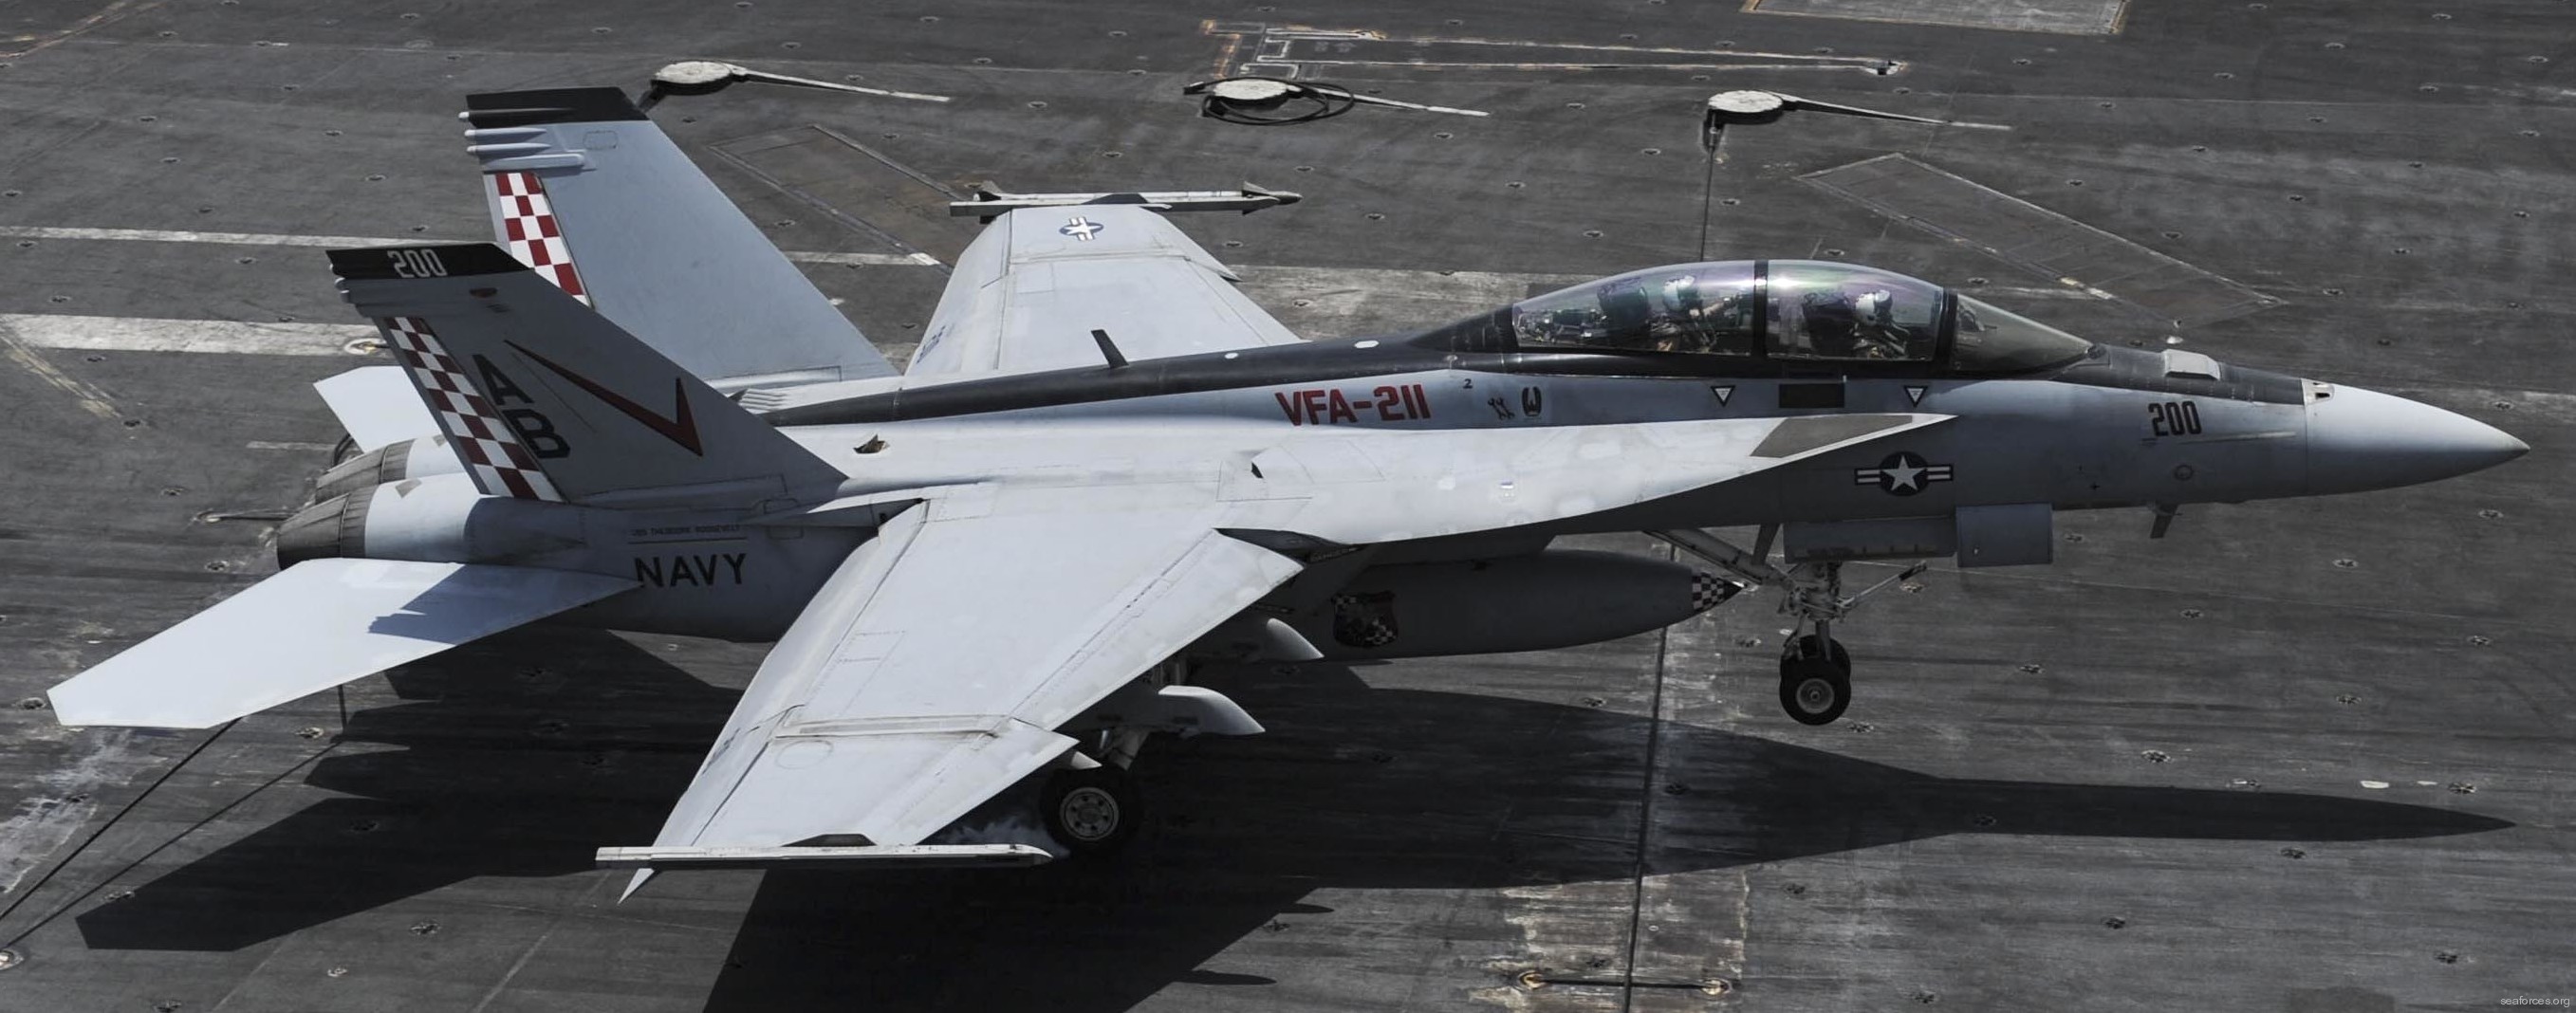 vfa-211 fighting checkmates strike fighter squadron f/a-18f super hornet navy carrier air wing cvw-1 uss theodore roosevelt cvn-71 96